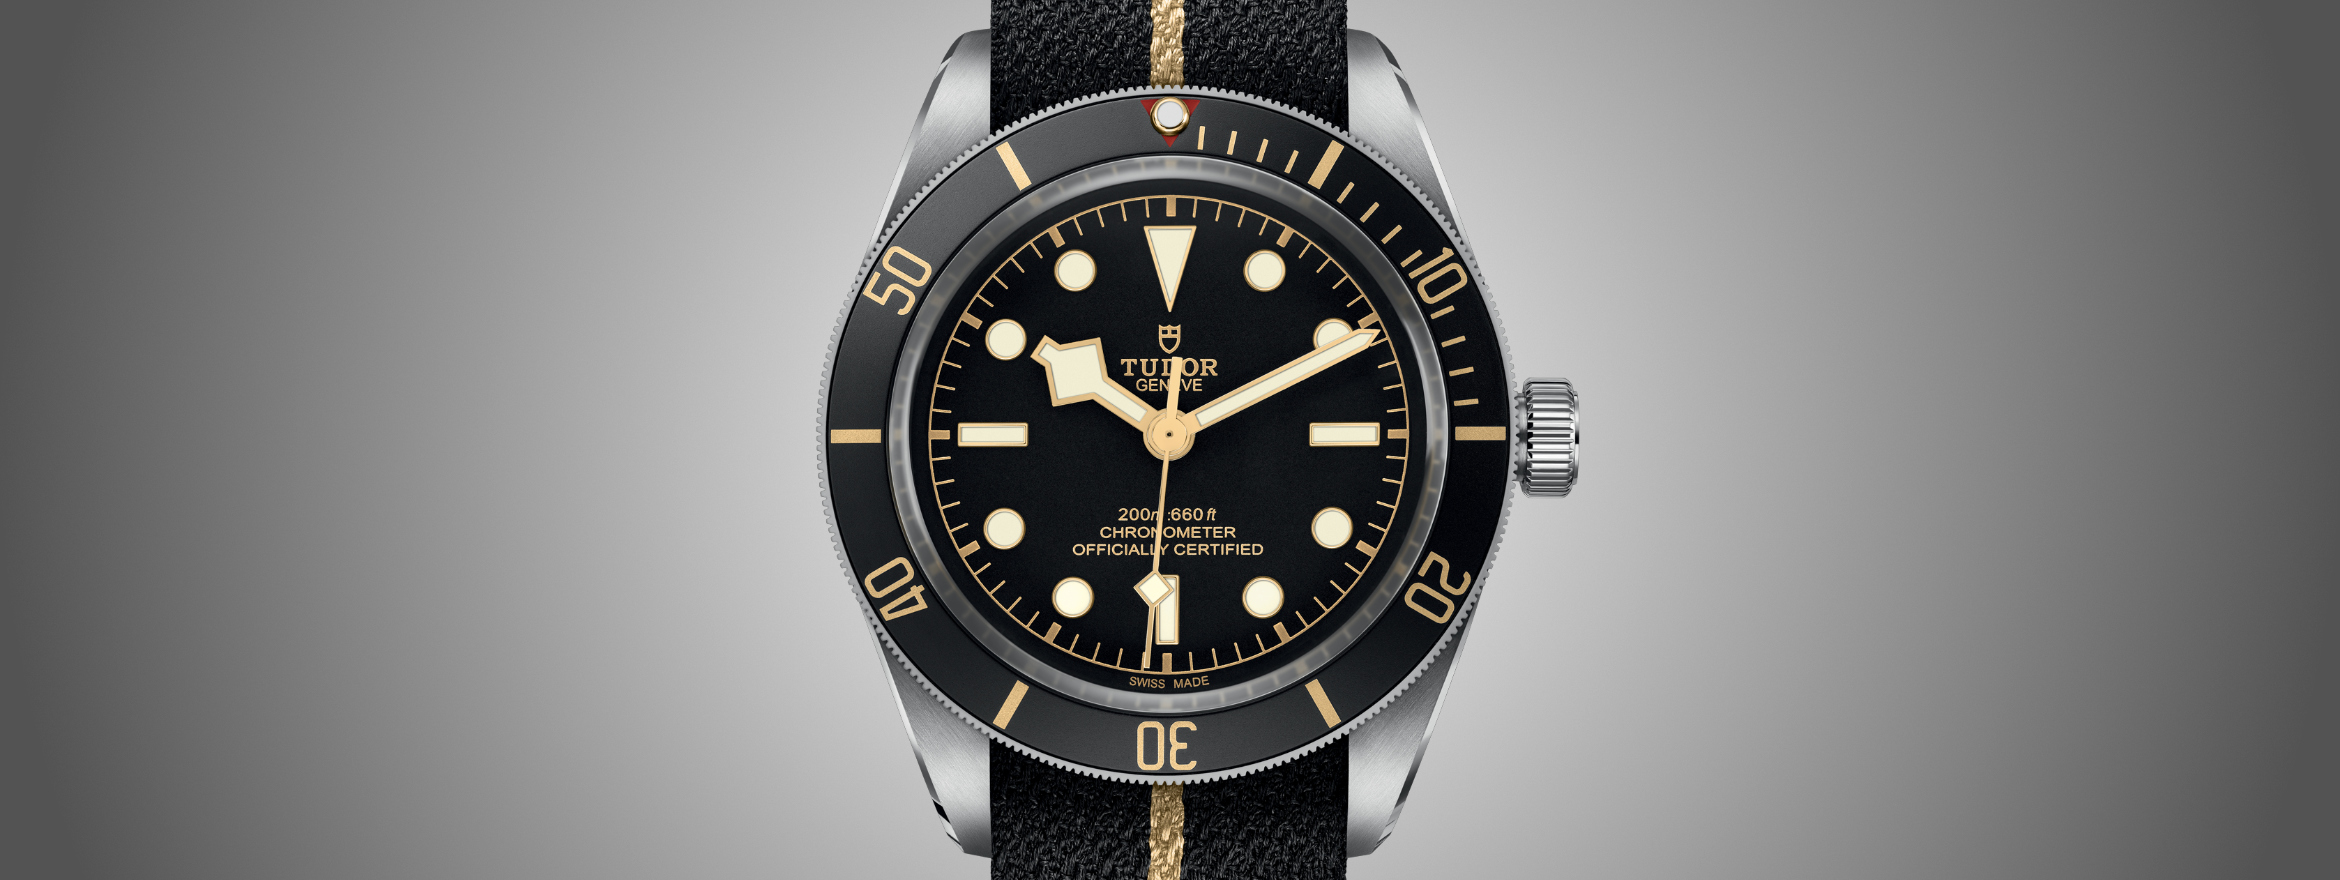 Shields and Roses – Looking at Iconic Modern Tudor Watches